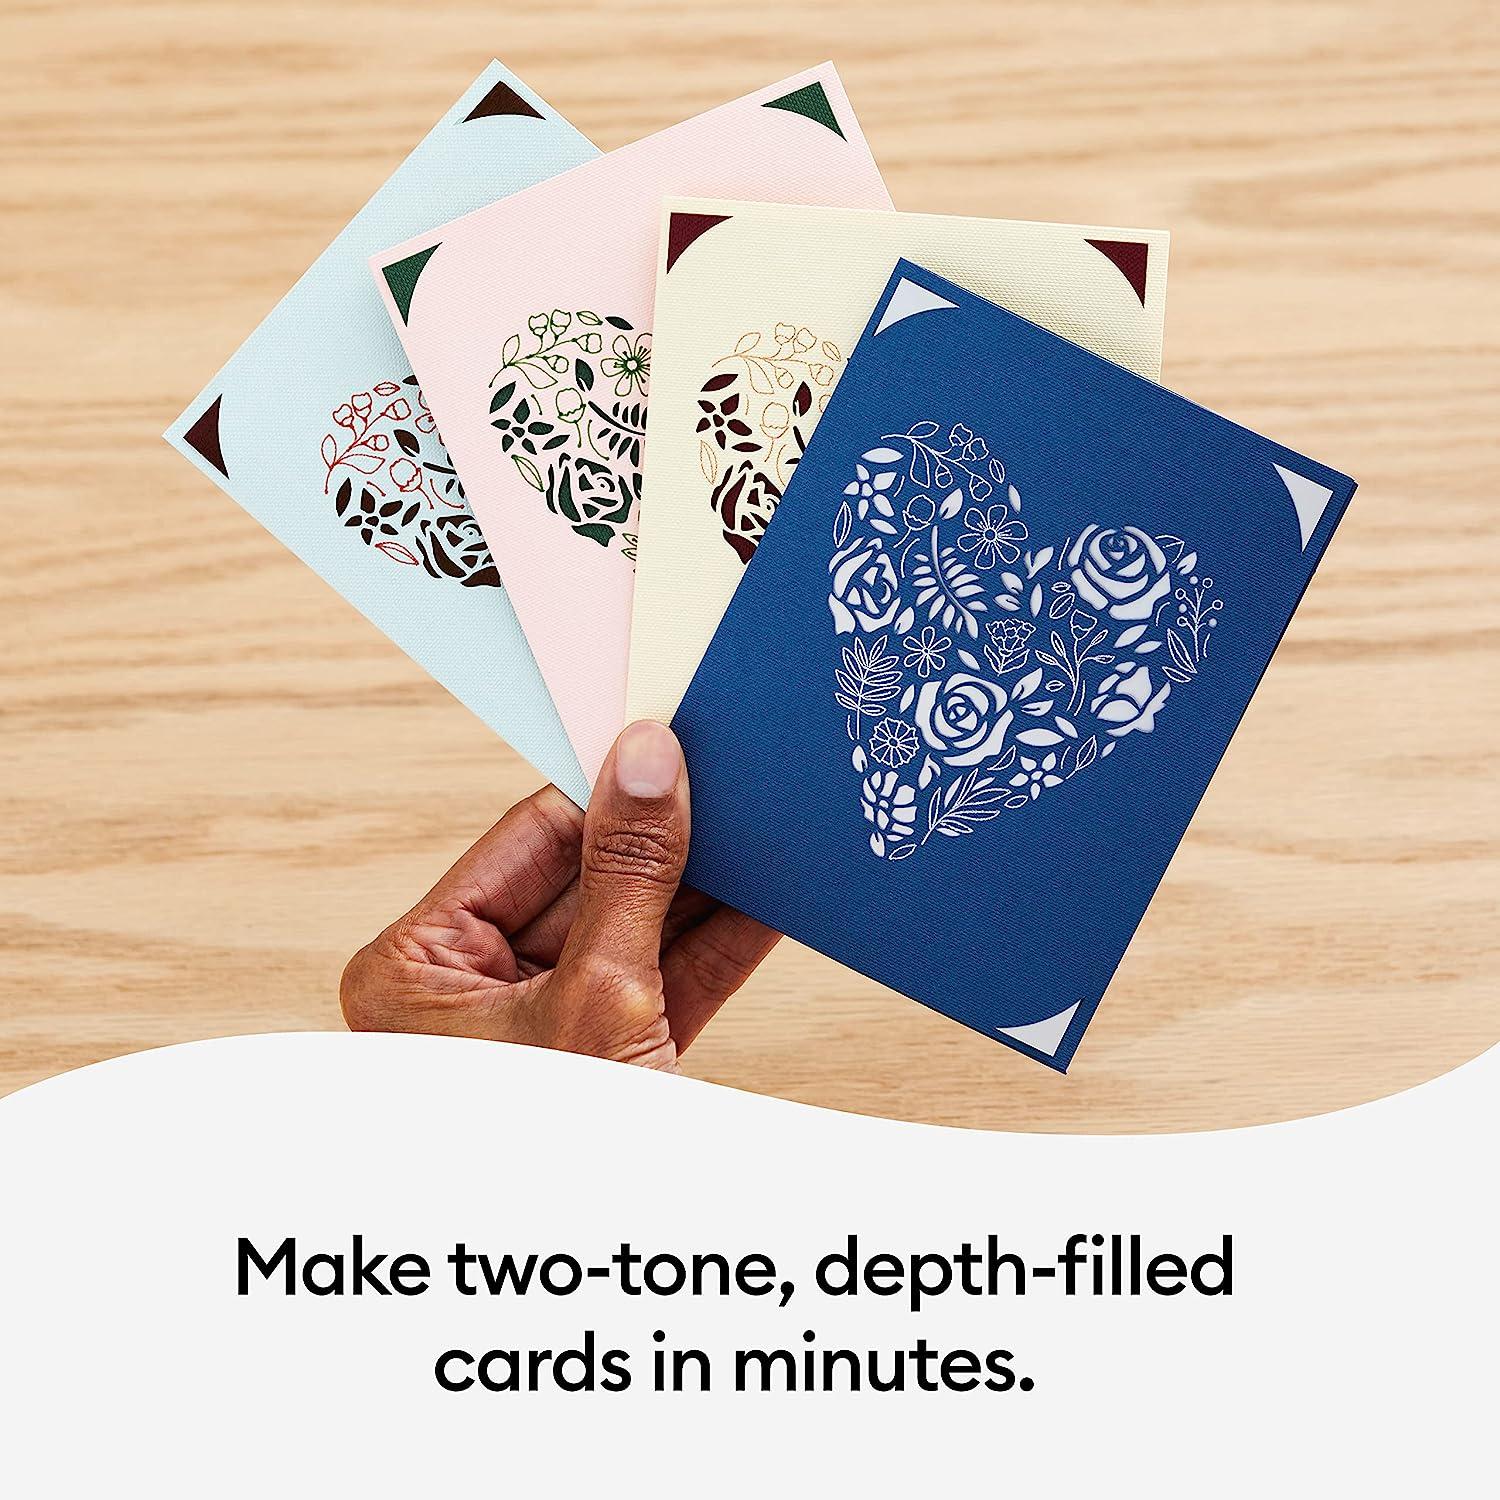 Cricut Insert Cards R10, Create Depth-Filled Birthday Cards, Thank You  Cards, Custom Greeting Cards at Home, Compatible with Cricut  Joy/Maker/Explore Machines, Princess Sampler (42 ct)